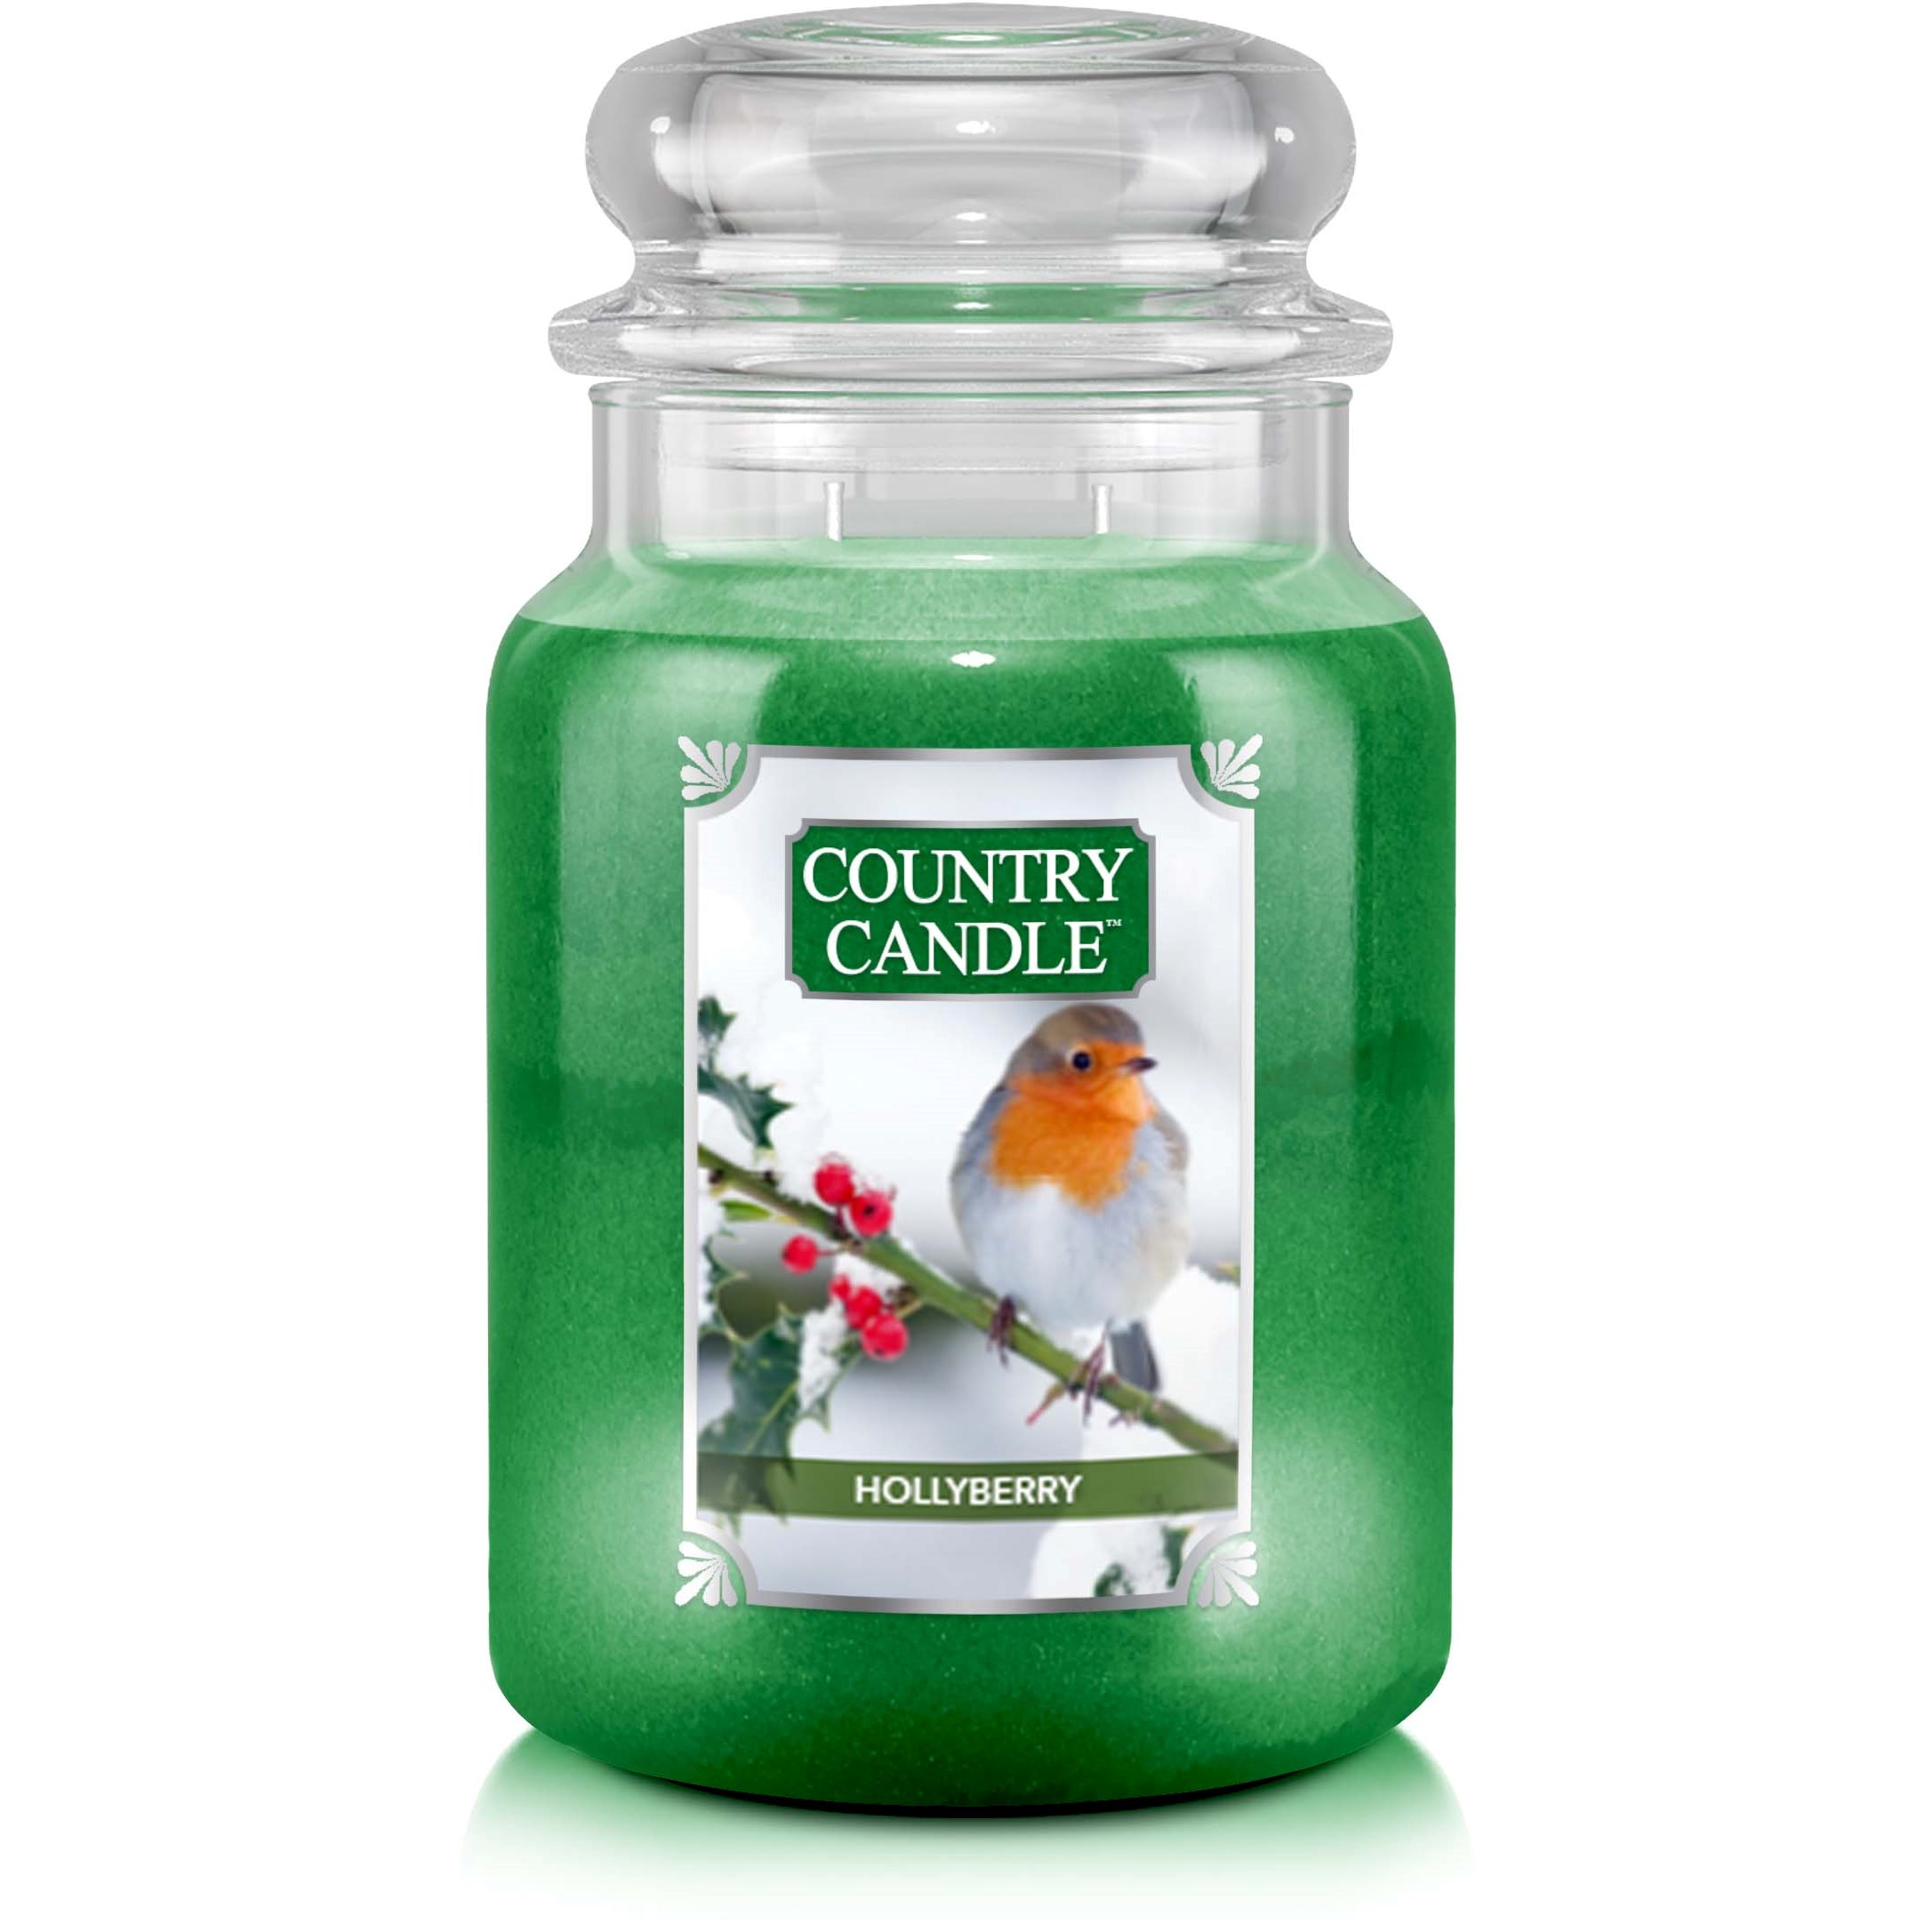 Country Candle Hollyberry Scented Candle Large 680 g